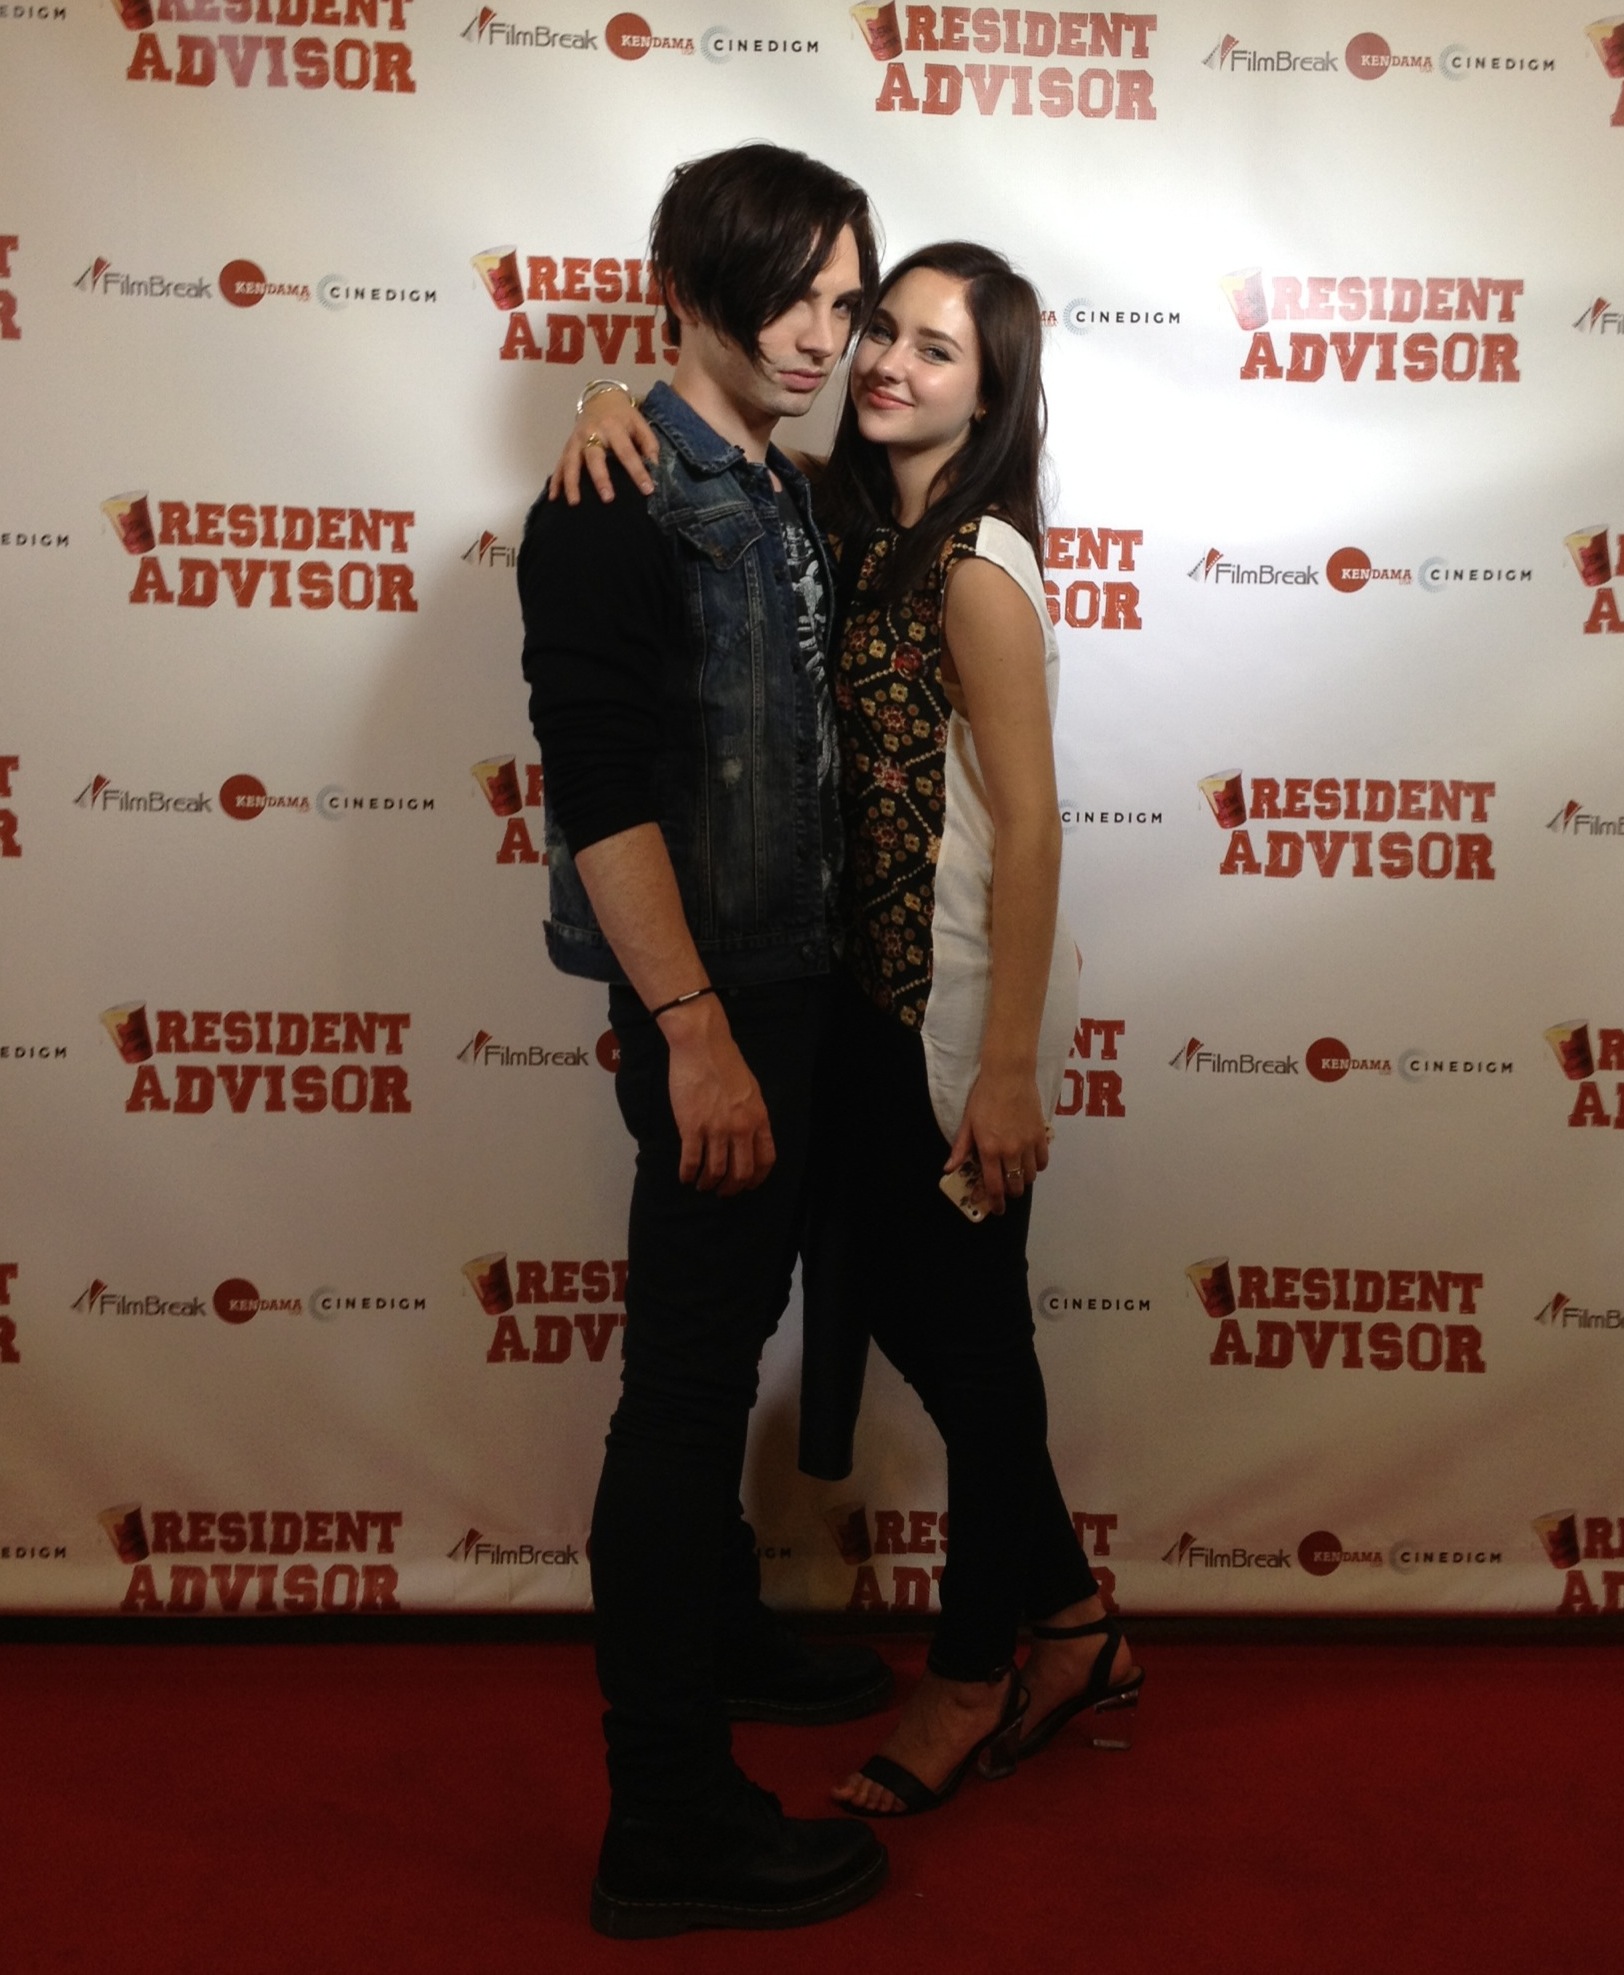 August Emerson and Haley Ramm attend the premiere of Resident Advisor.